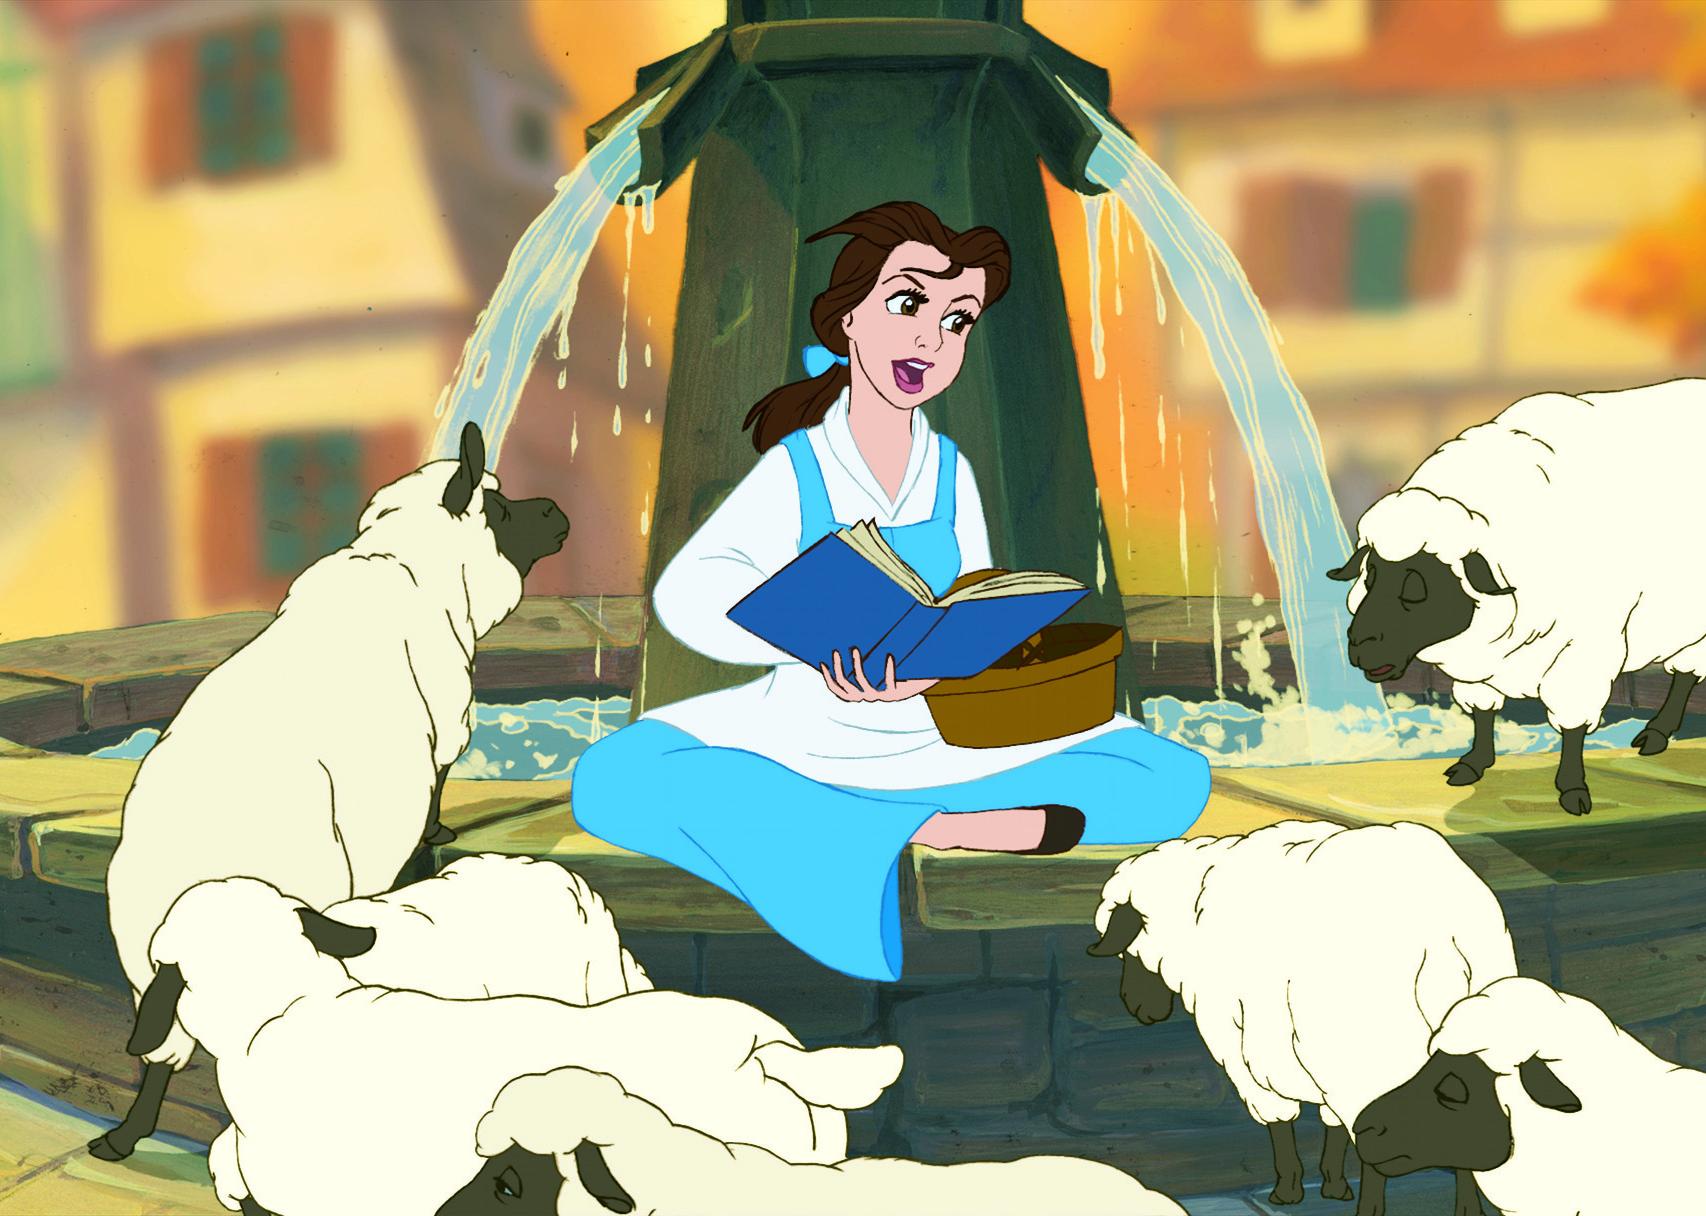 A cartoon of a young woman in a blue dress sitting in a water fountain singing to some sheep.